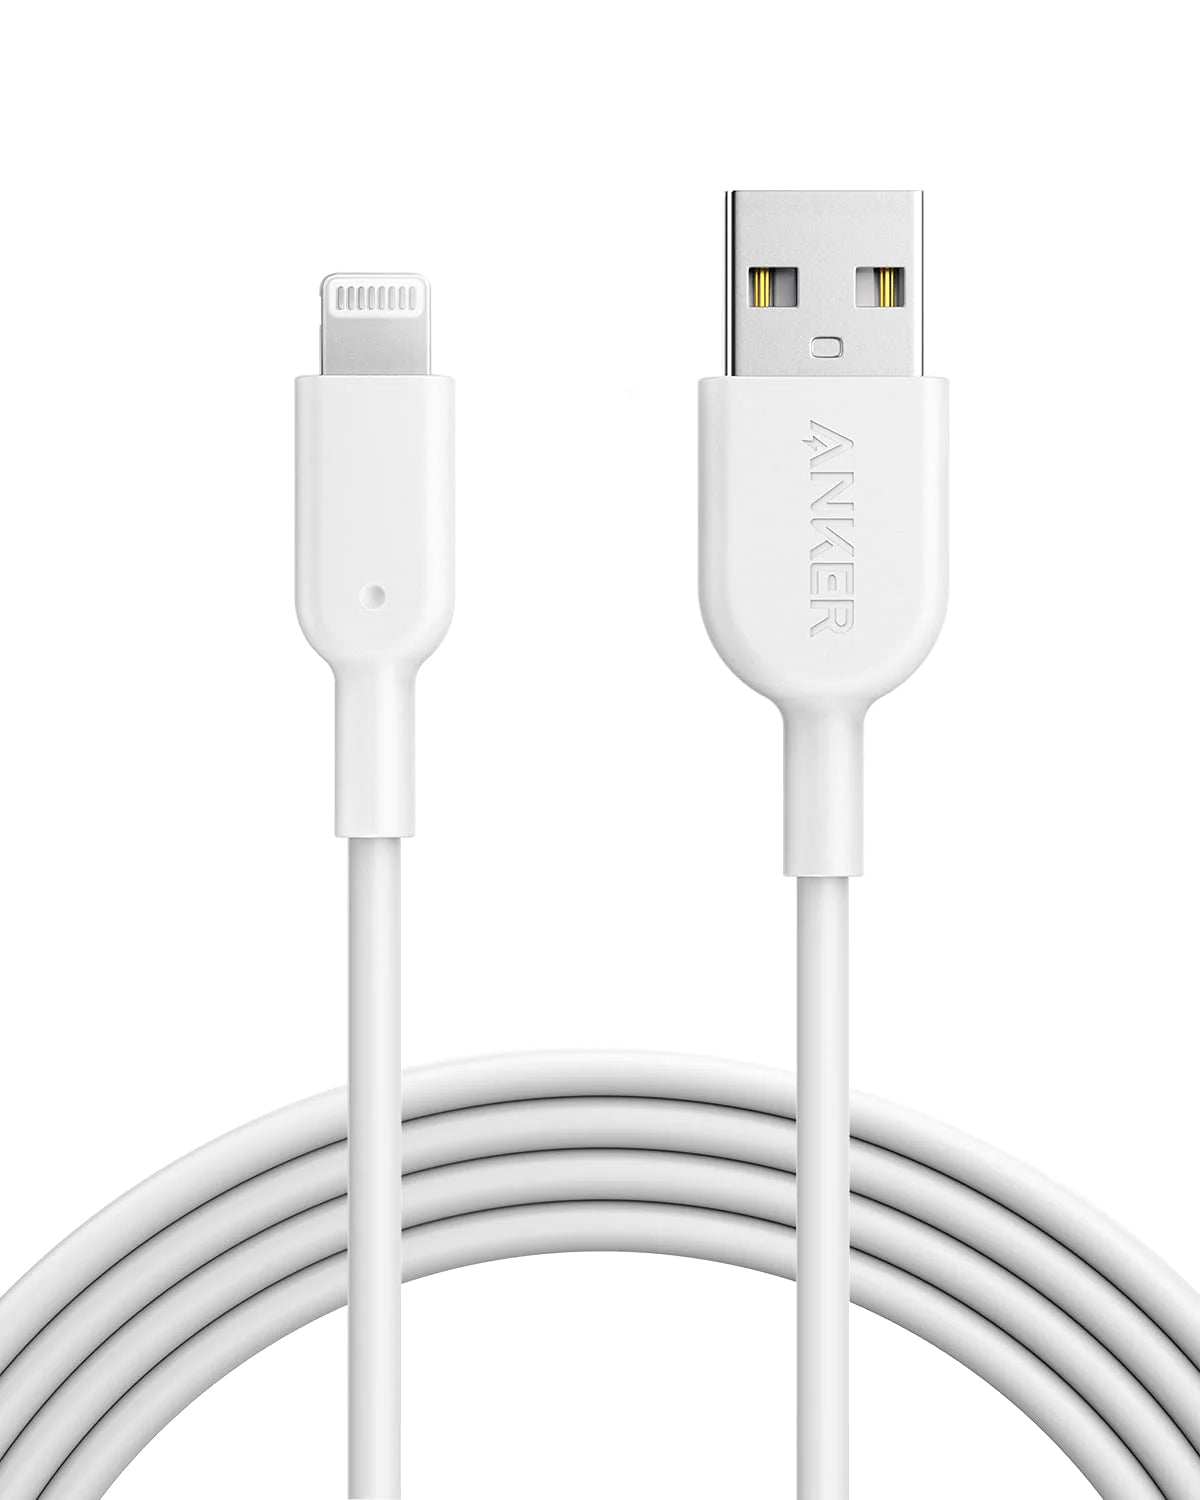 Anker Powerline II USB-A to Lightning Cable 1.8m - White with 18 months official warranty